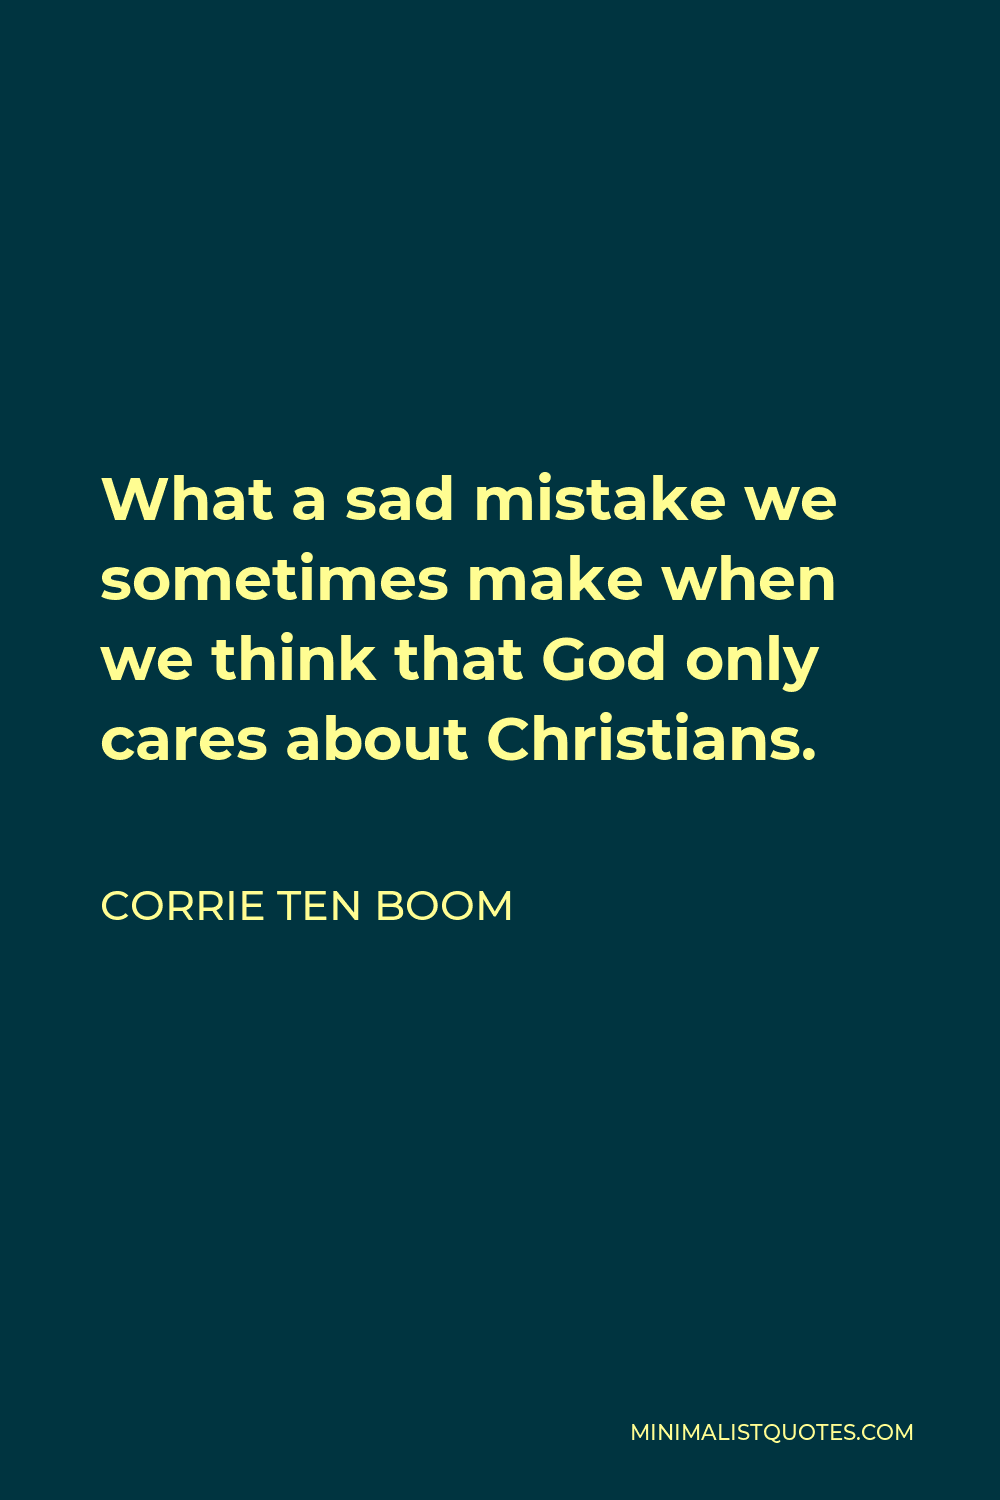 Corrie ten Boom Quote - What a sad mistake we sometimes make when we think that God only cares about Christians.